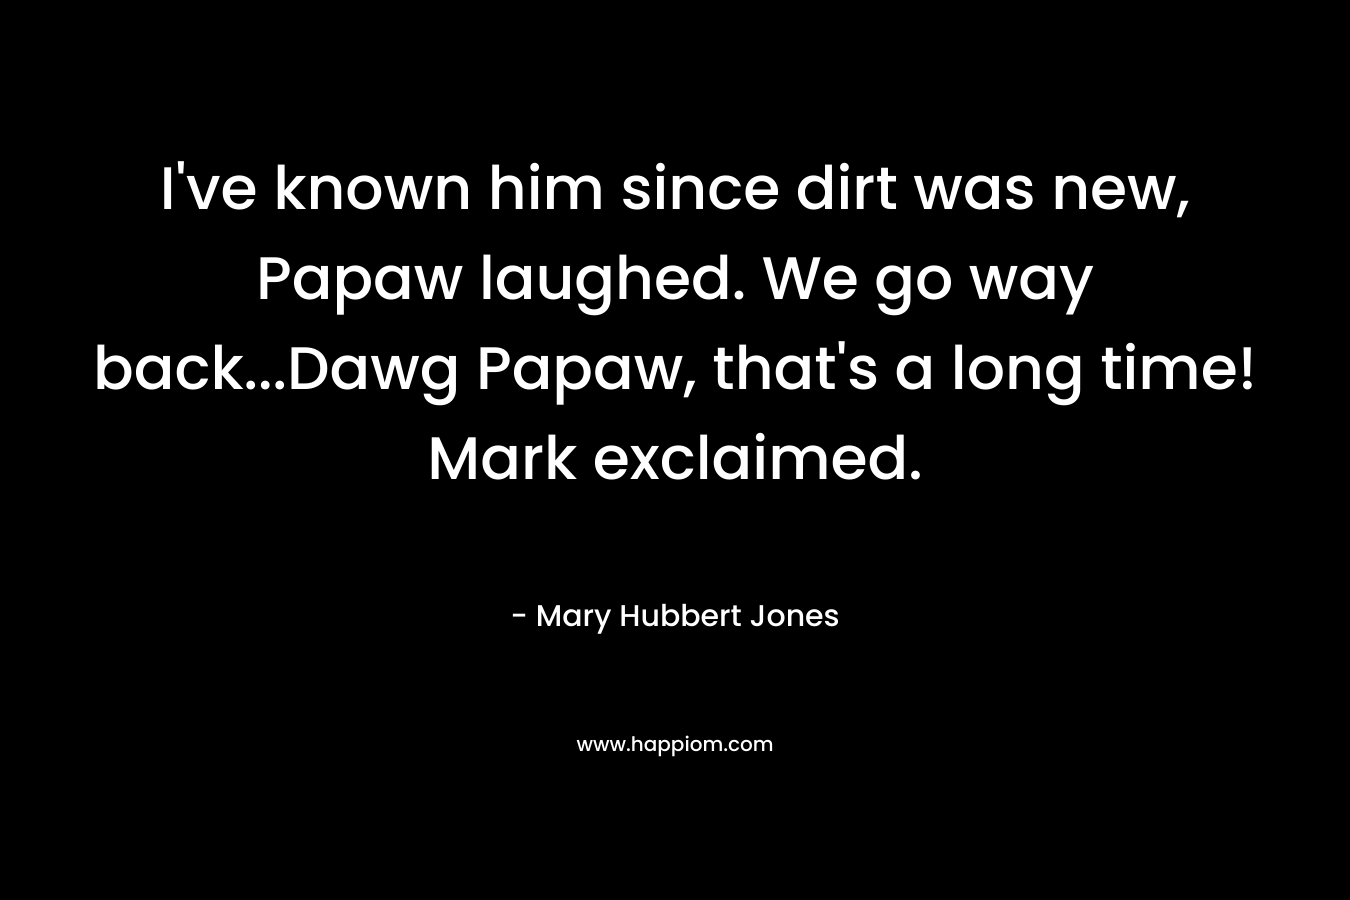 I’ve known him since dirt was new, Papaw laughed. We go way back…Dawg Papaw, that’s a long time! Mark exclaimed. – Mary Hubbert Jones